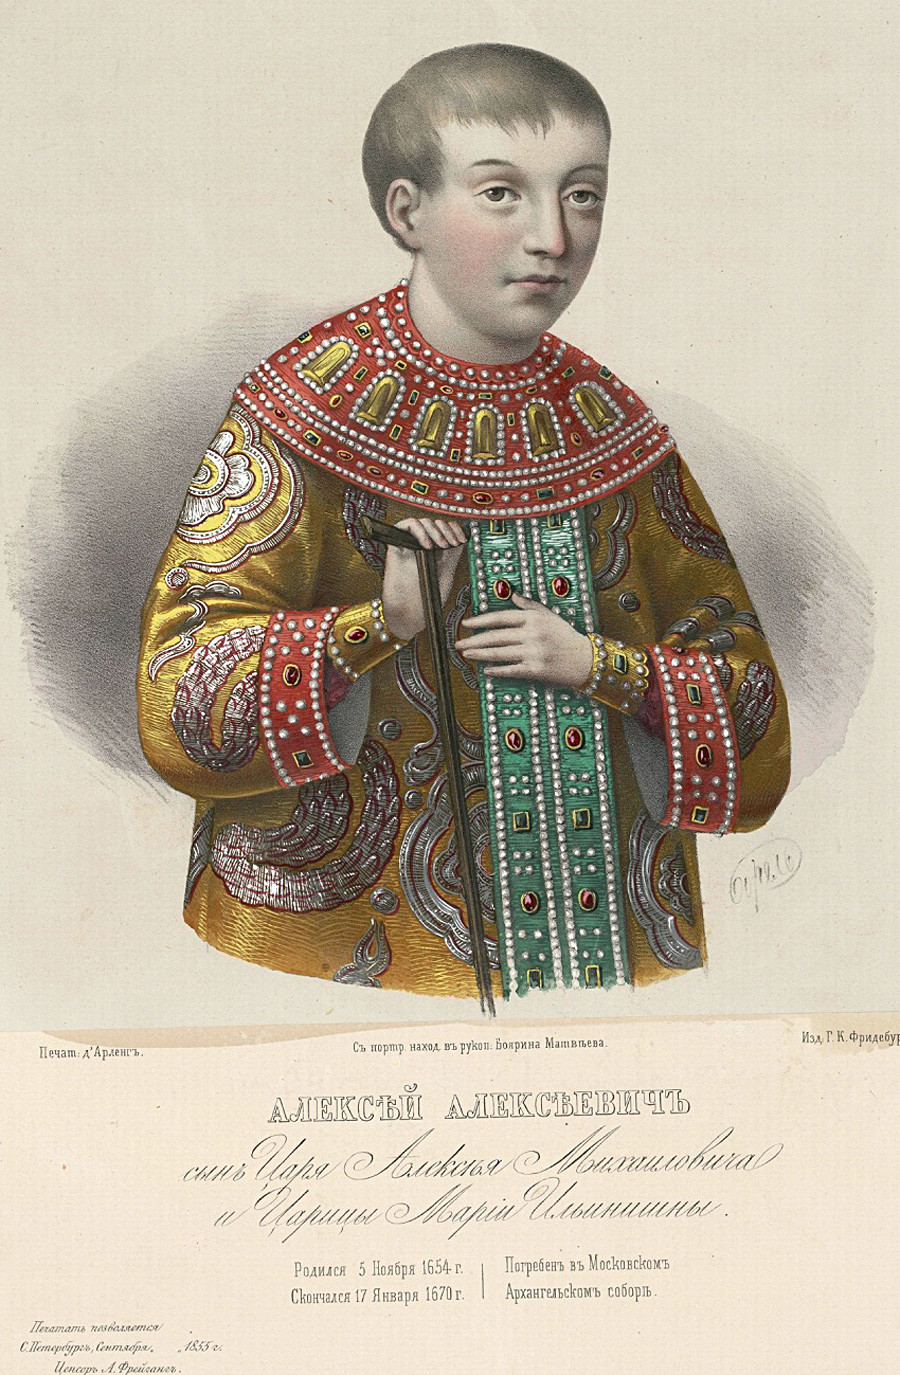 Alexey Alexeevich of Russia (1654-1670)